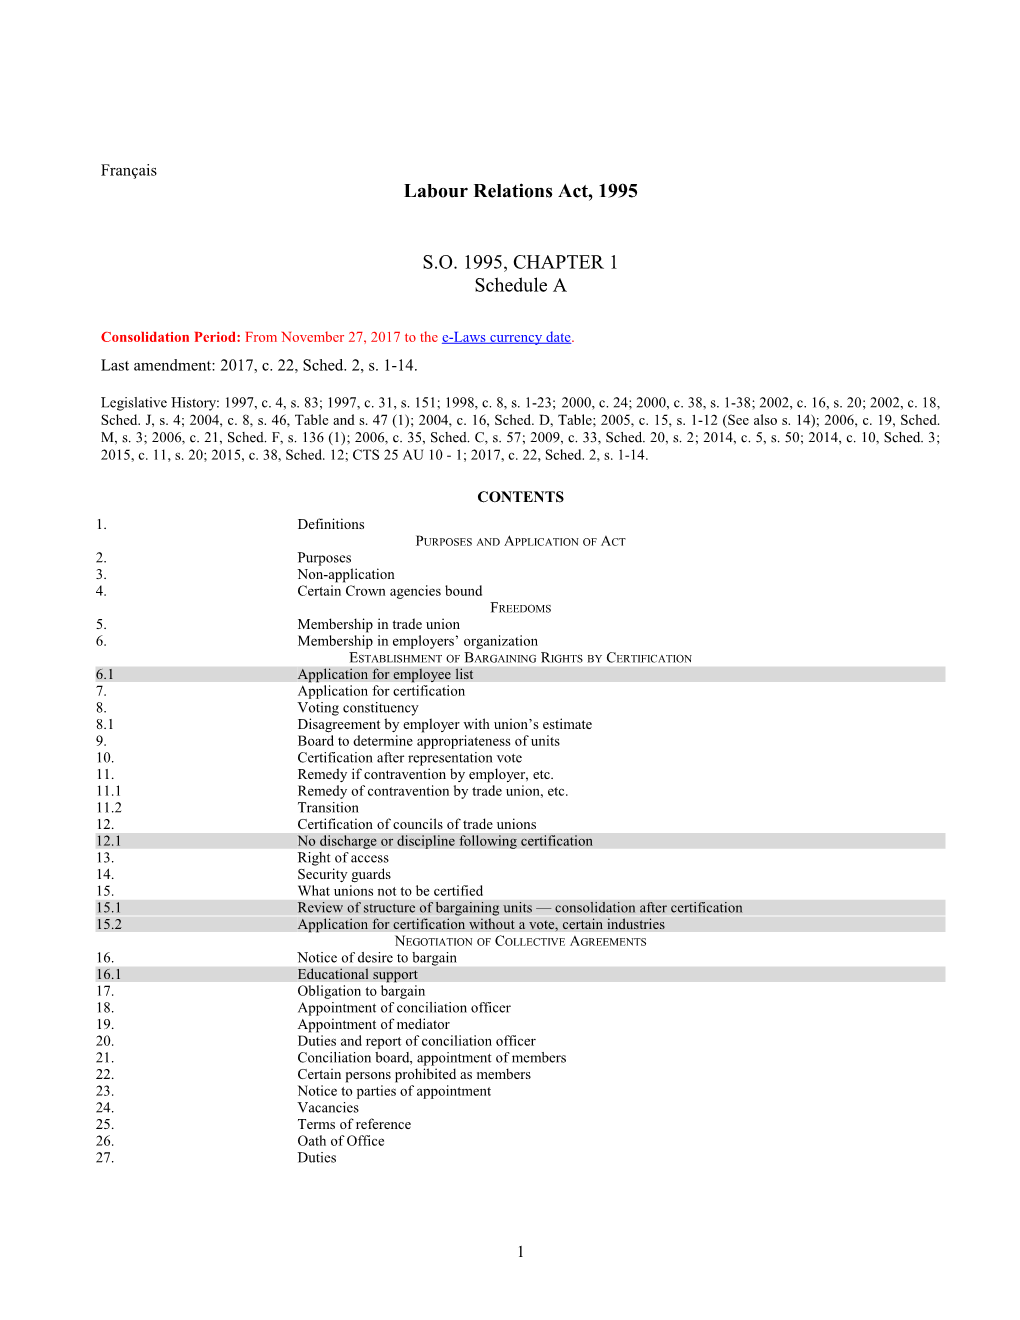 Labour Relations Act, 1995, S.O. 1995, C. 1, Sched. A